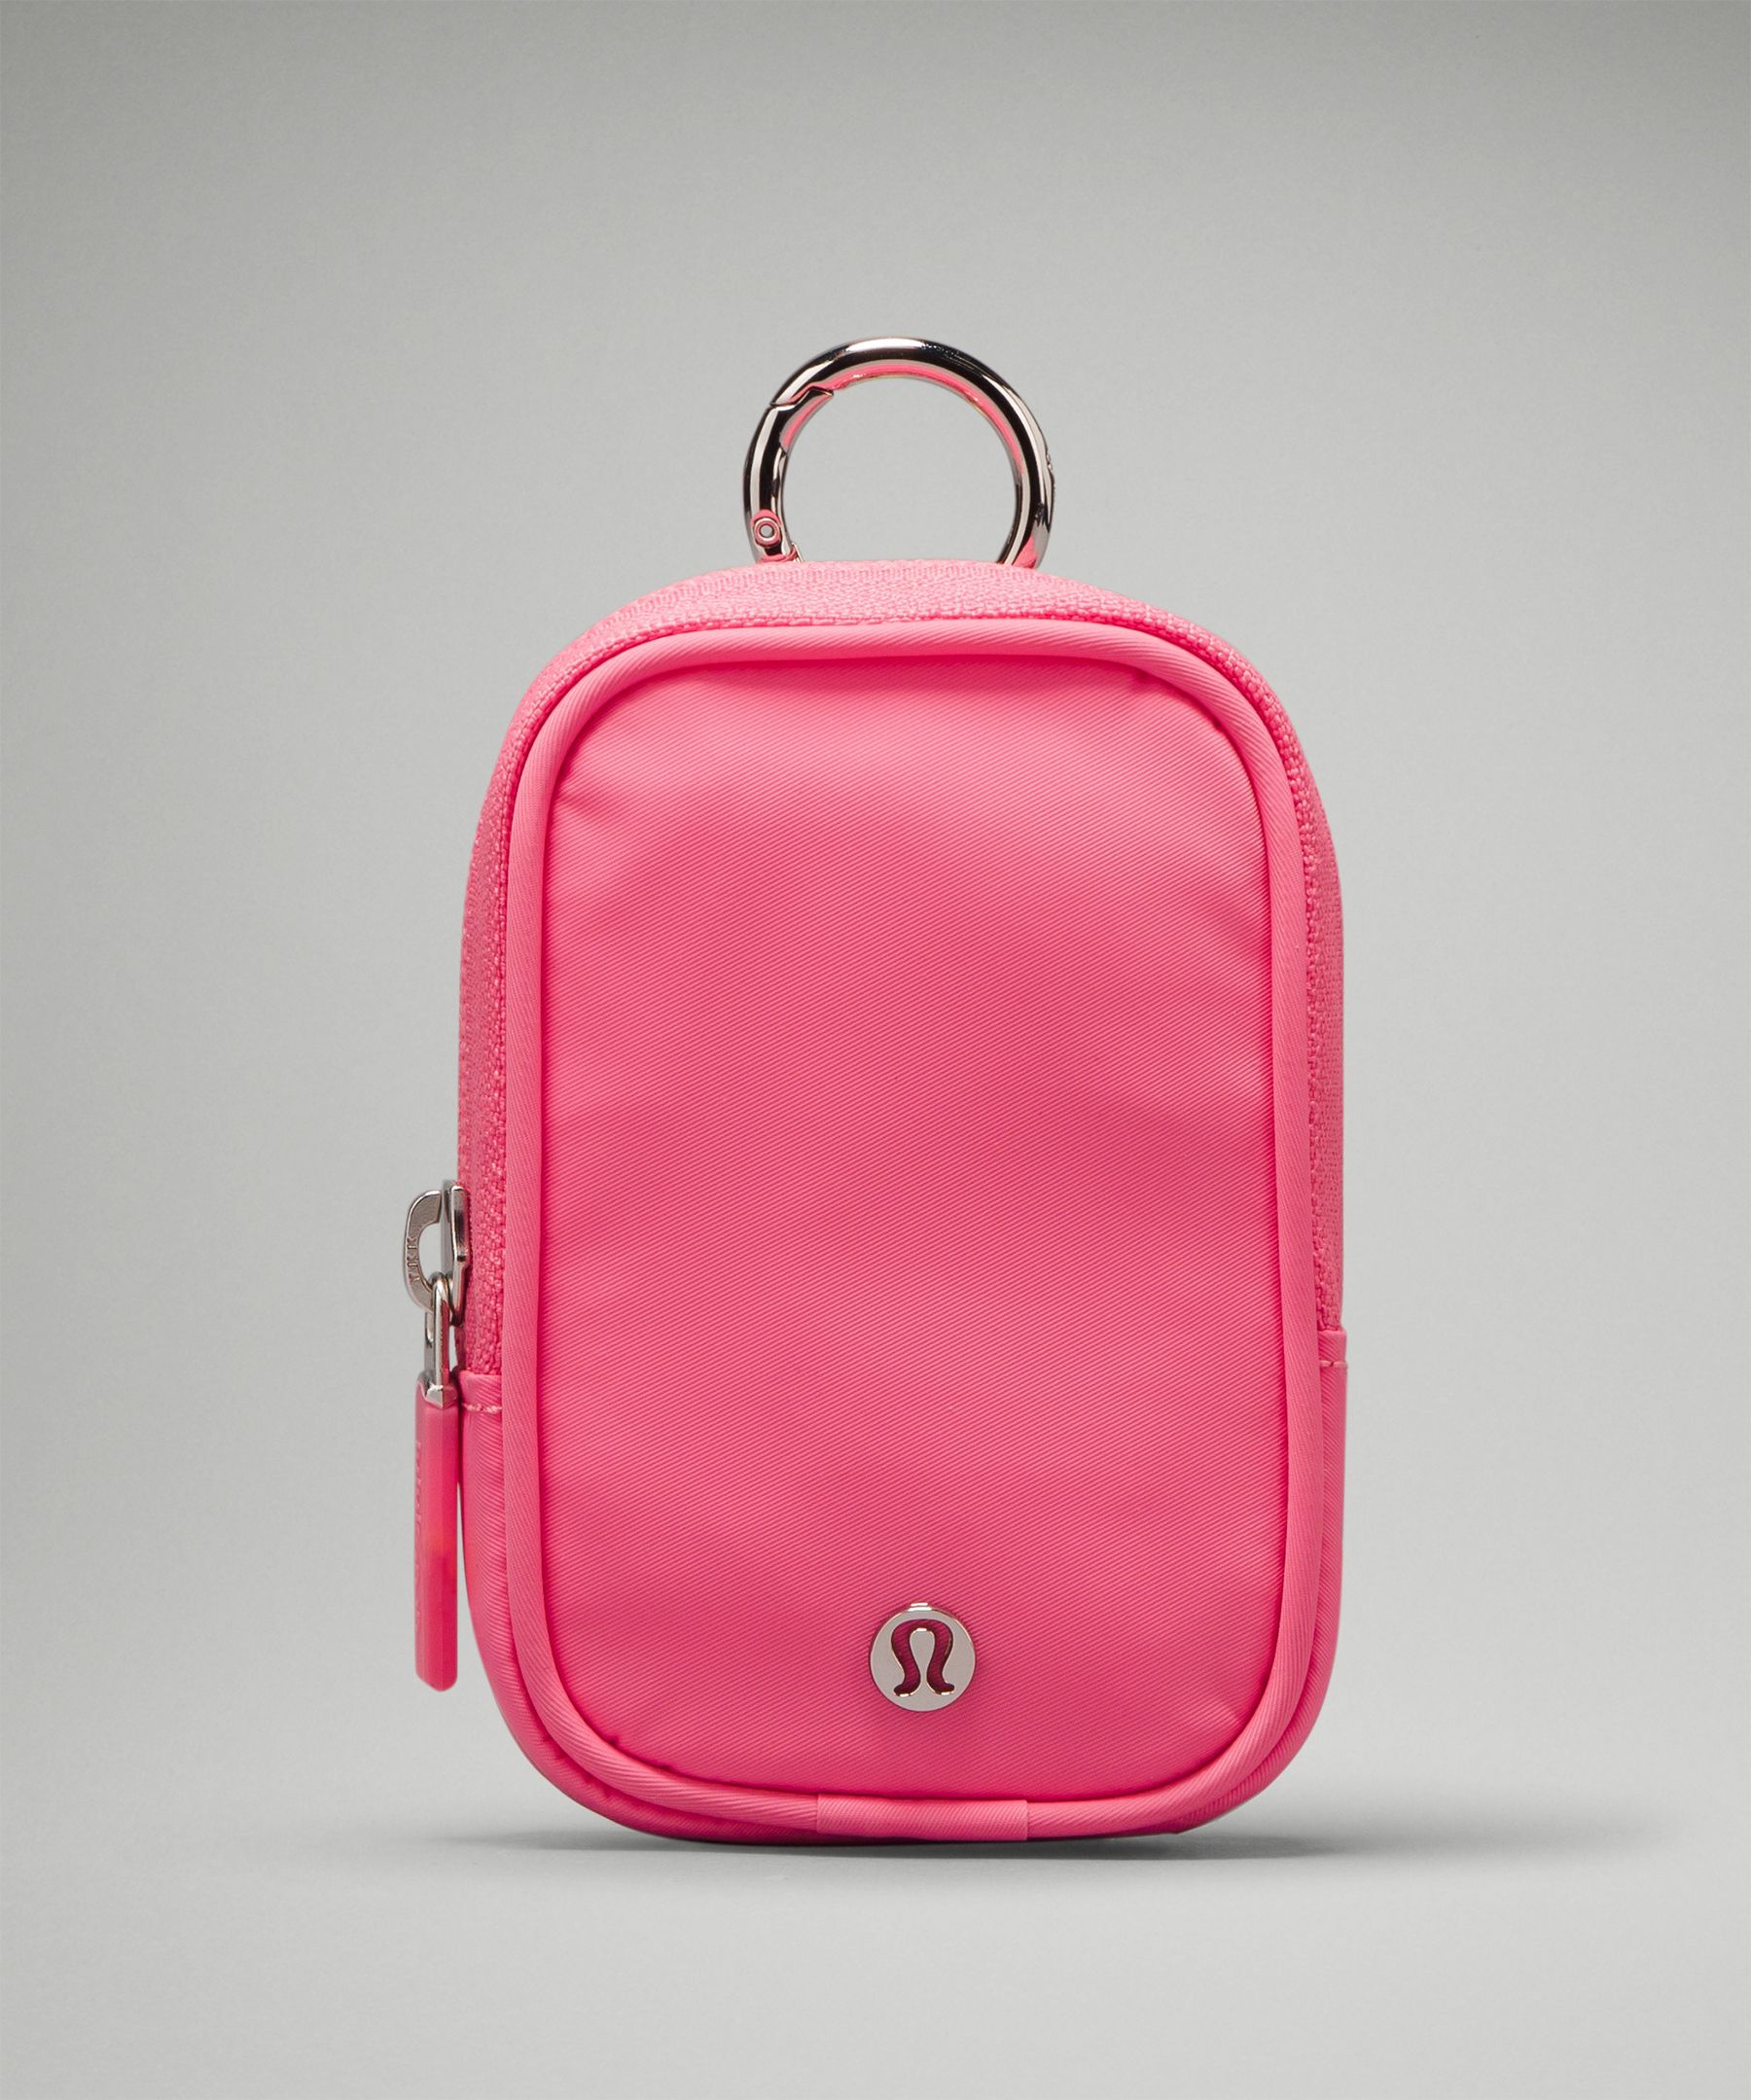 Lululemon Clippable Nano Pouch In Pink